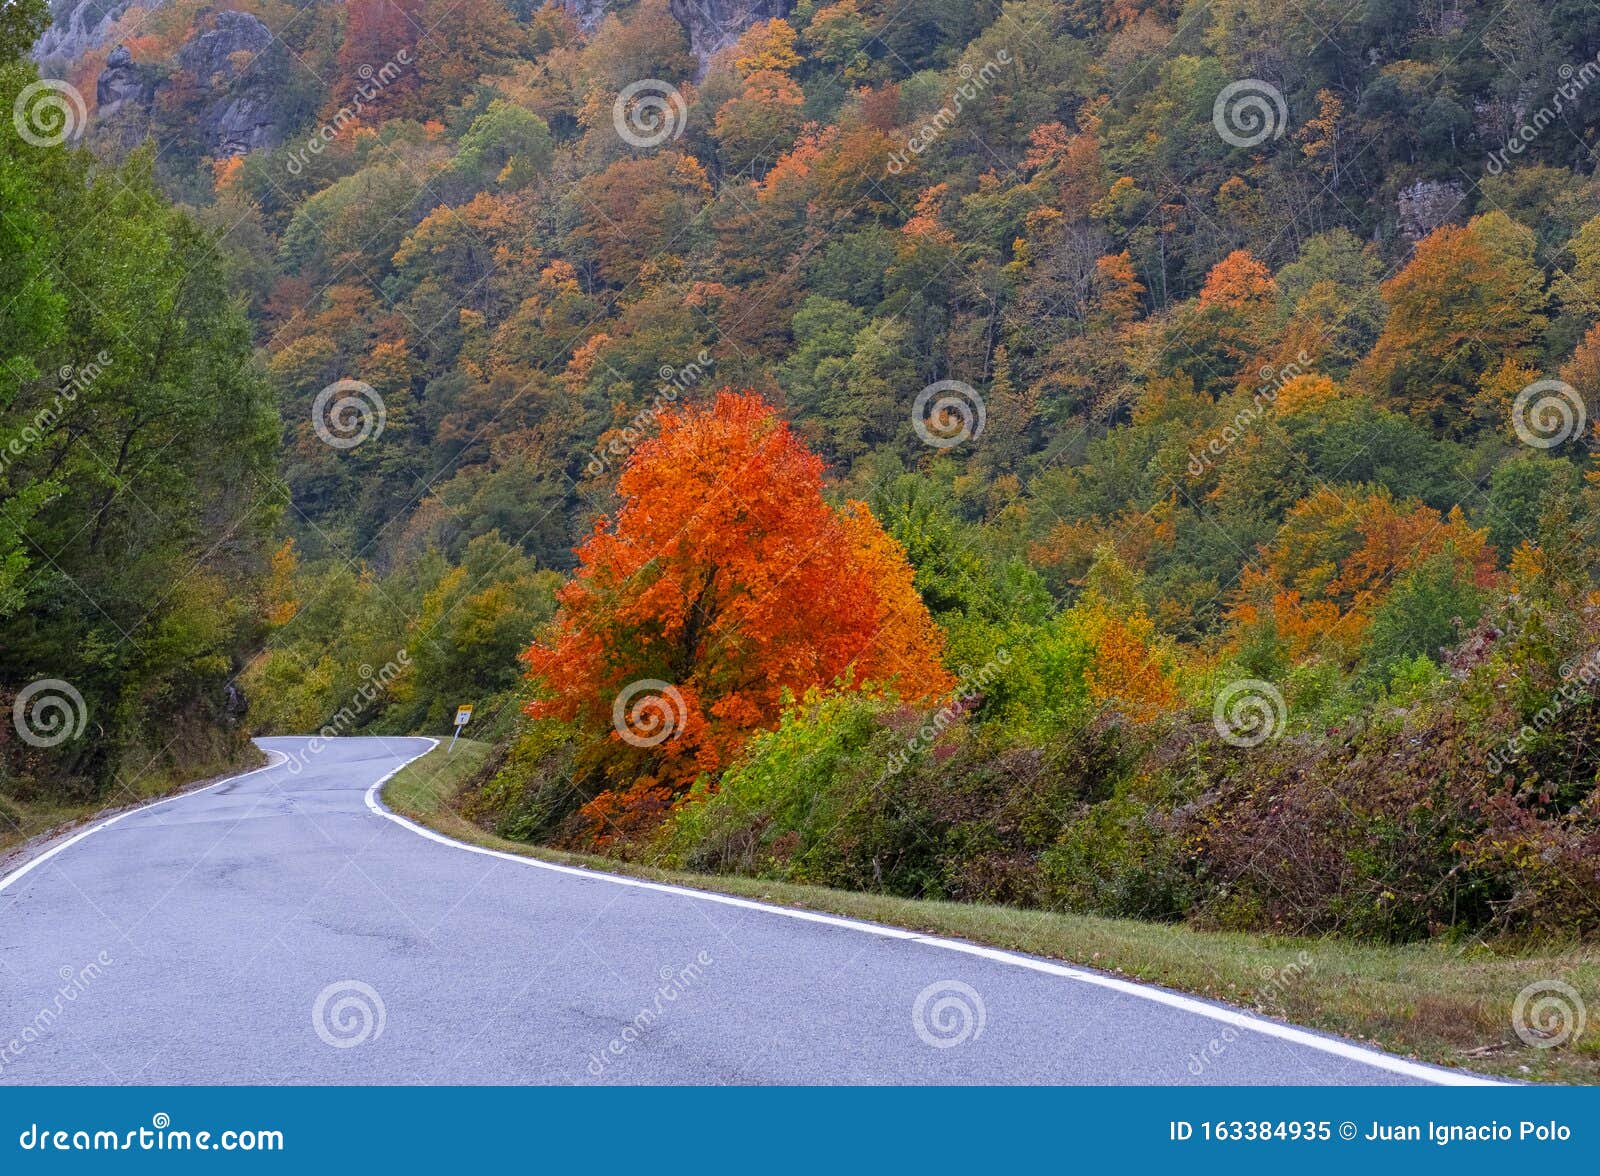 autumn colors on a road in the valley of arce, navarra